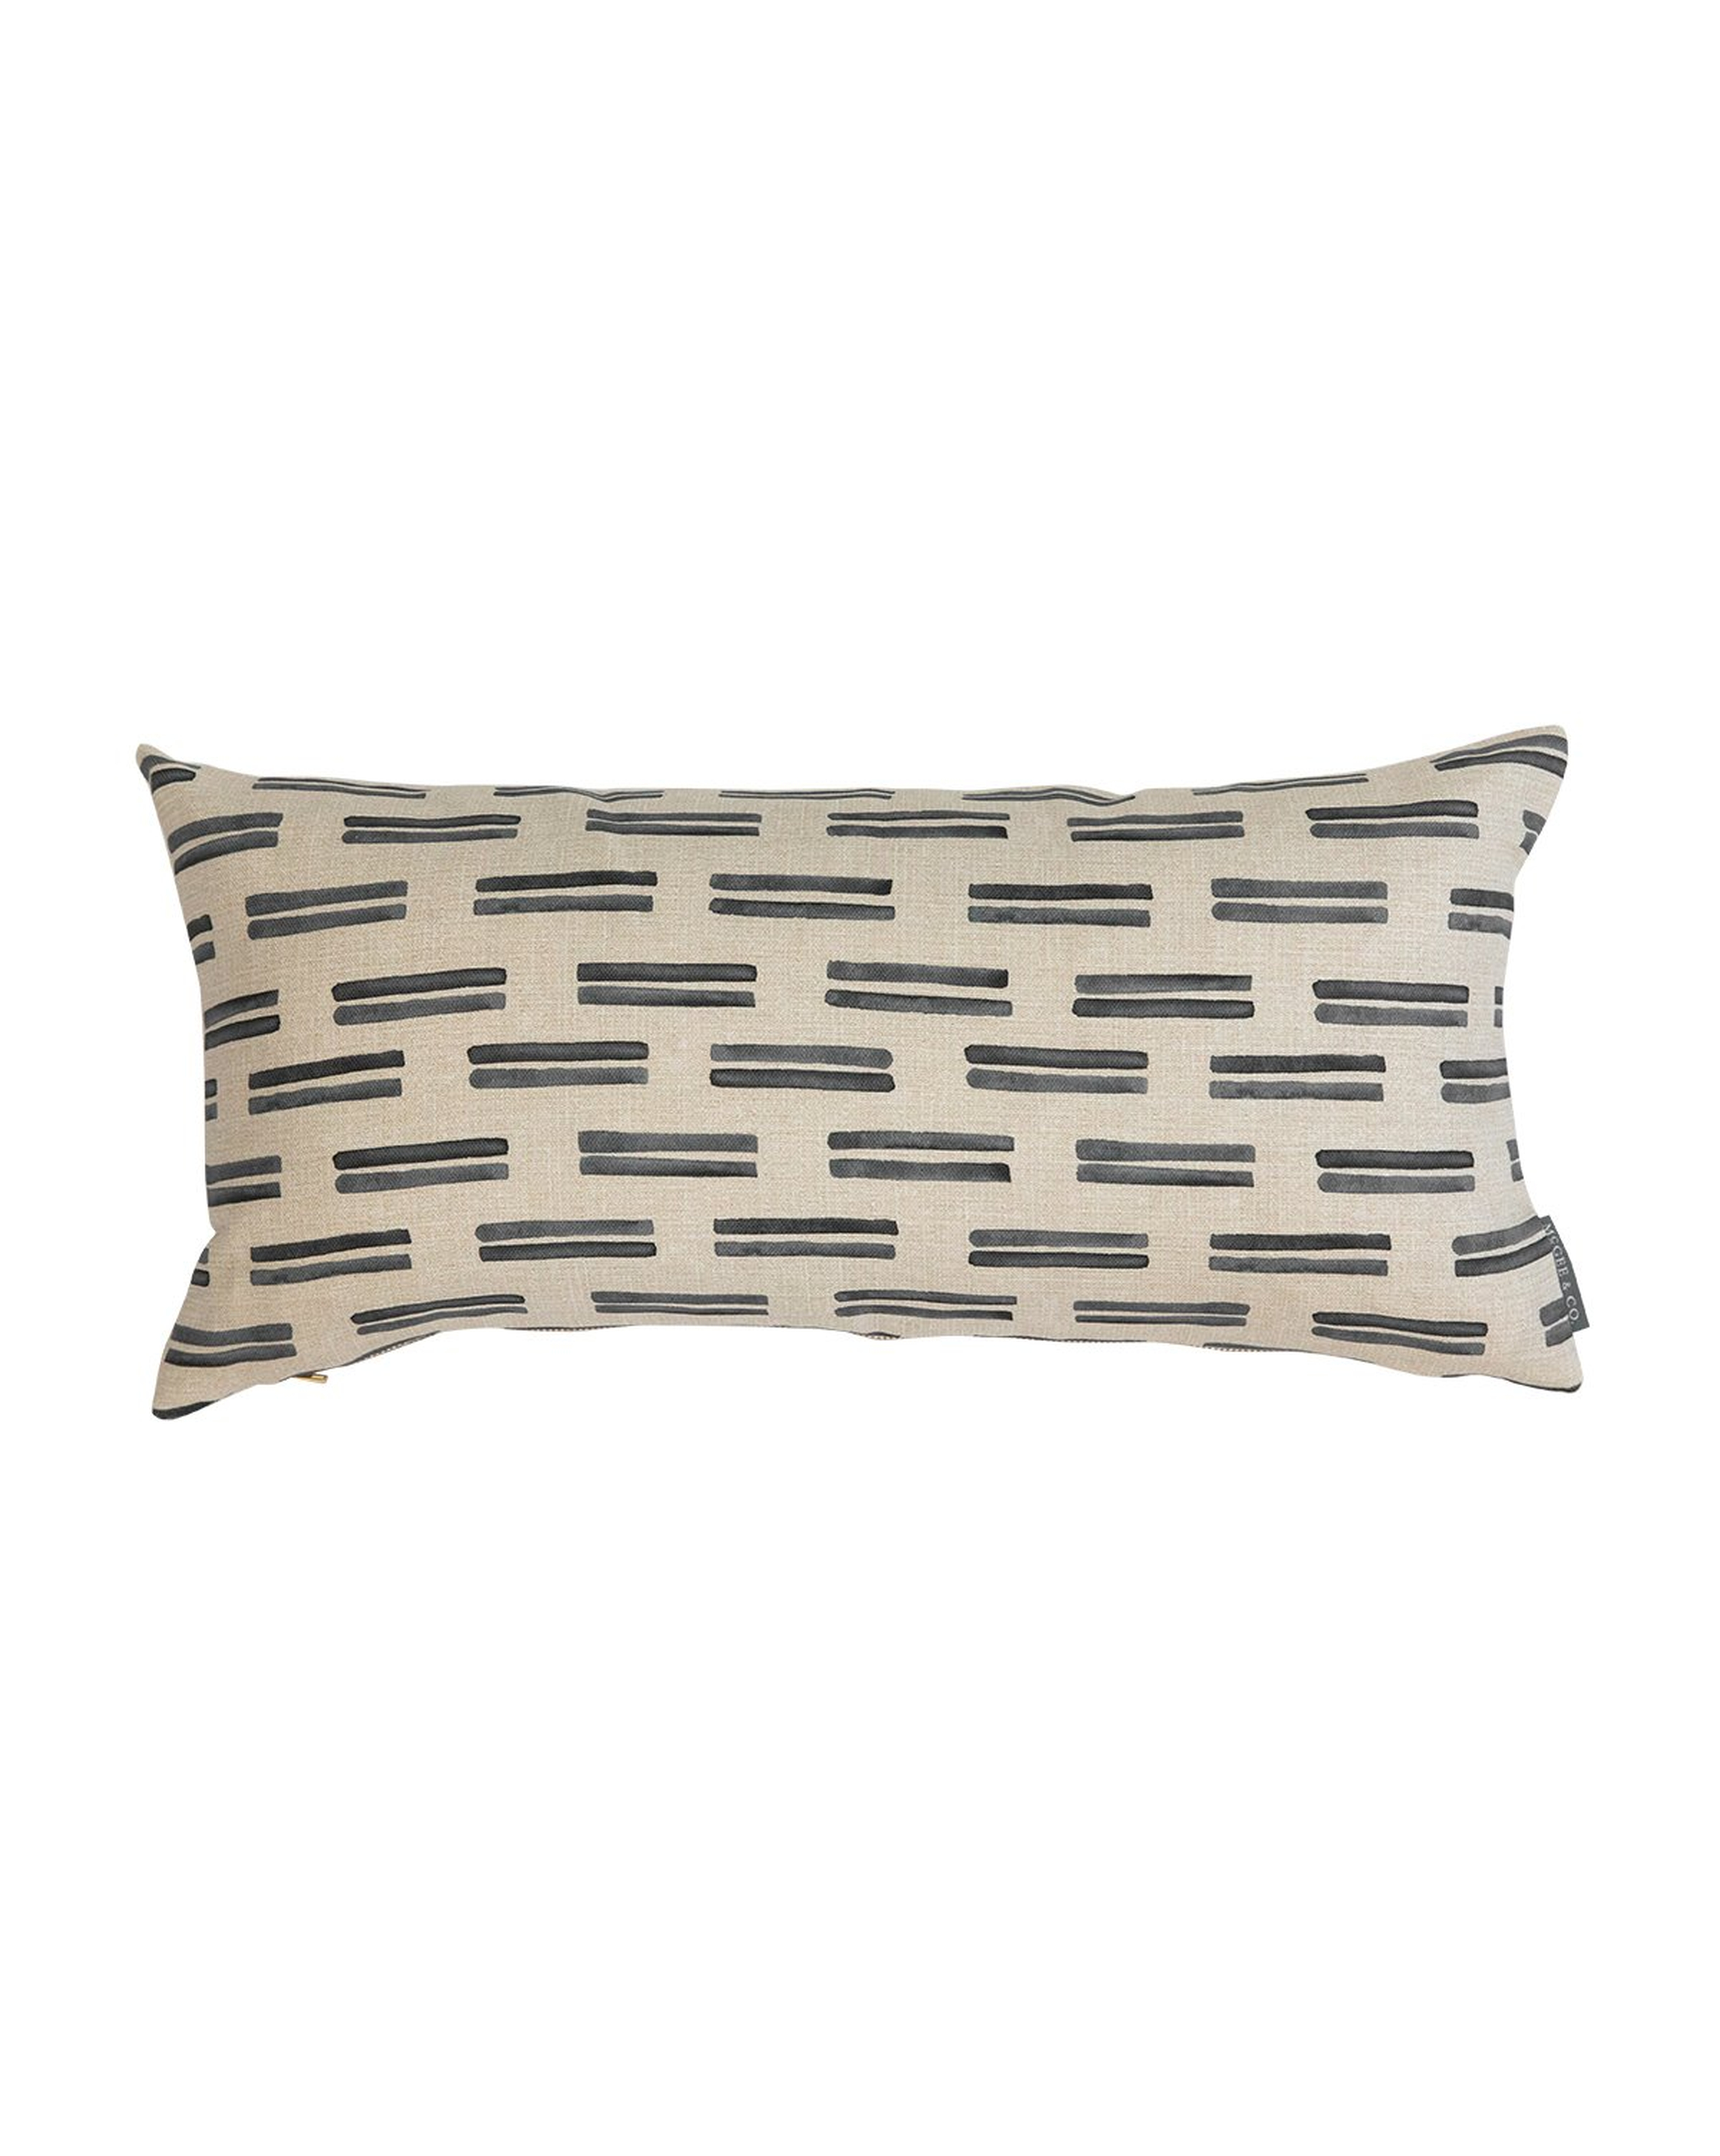 AVERY DOUBLE STRIPE PILLOW COVER - 12" x 24" - GRAY - McGee & Co.